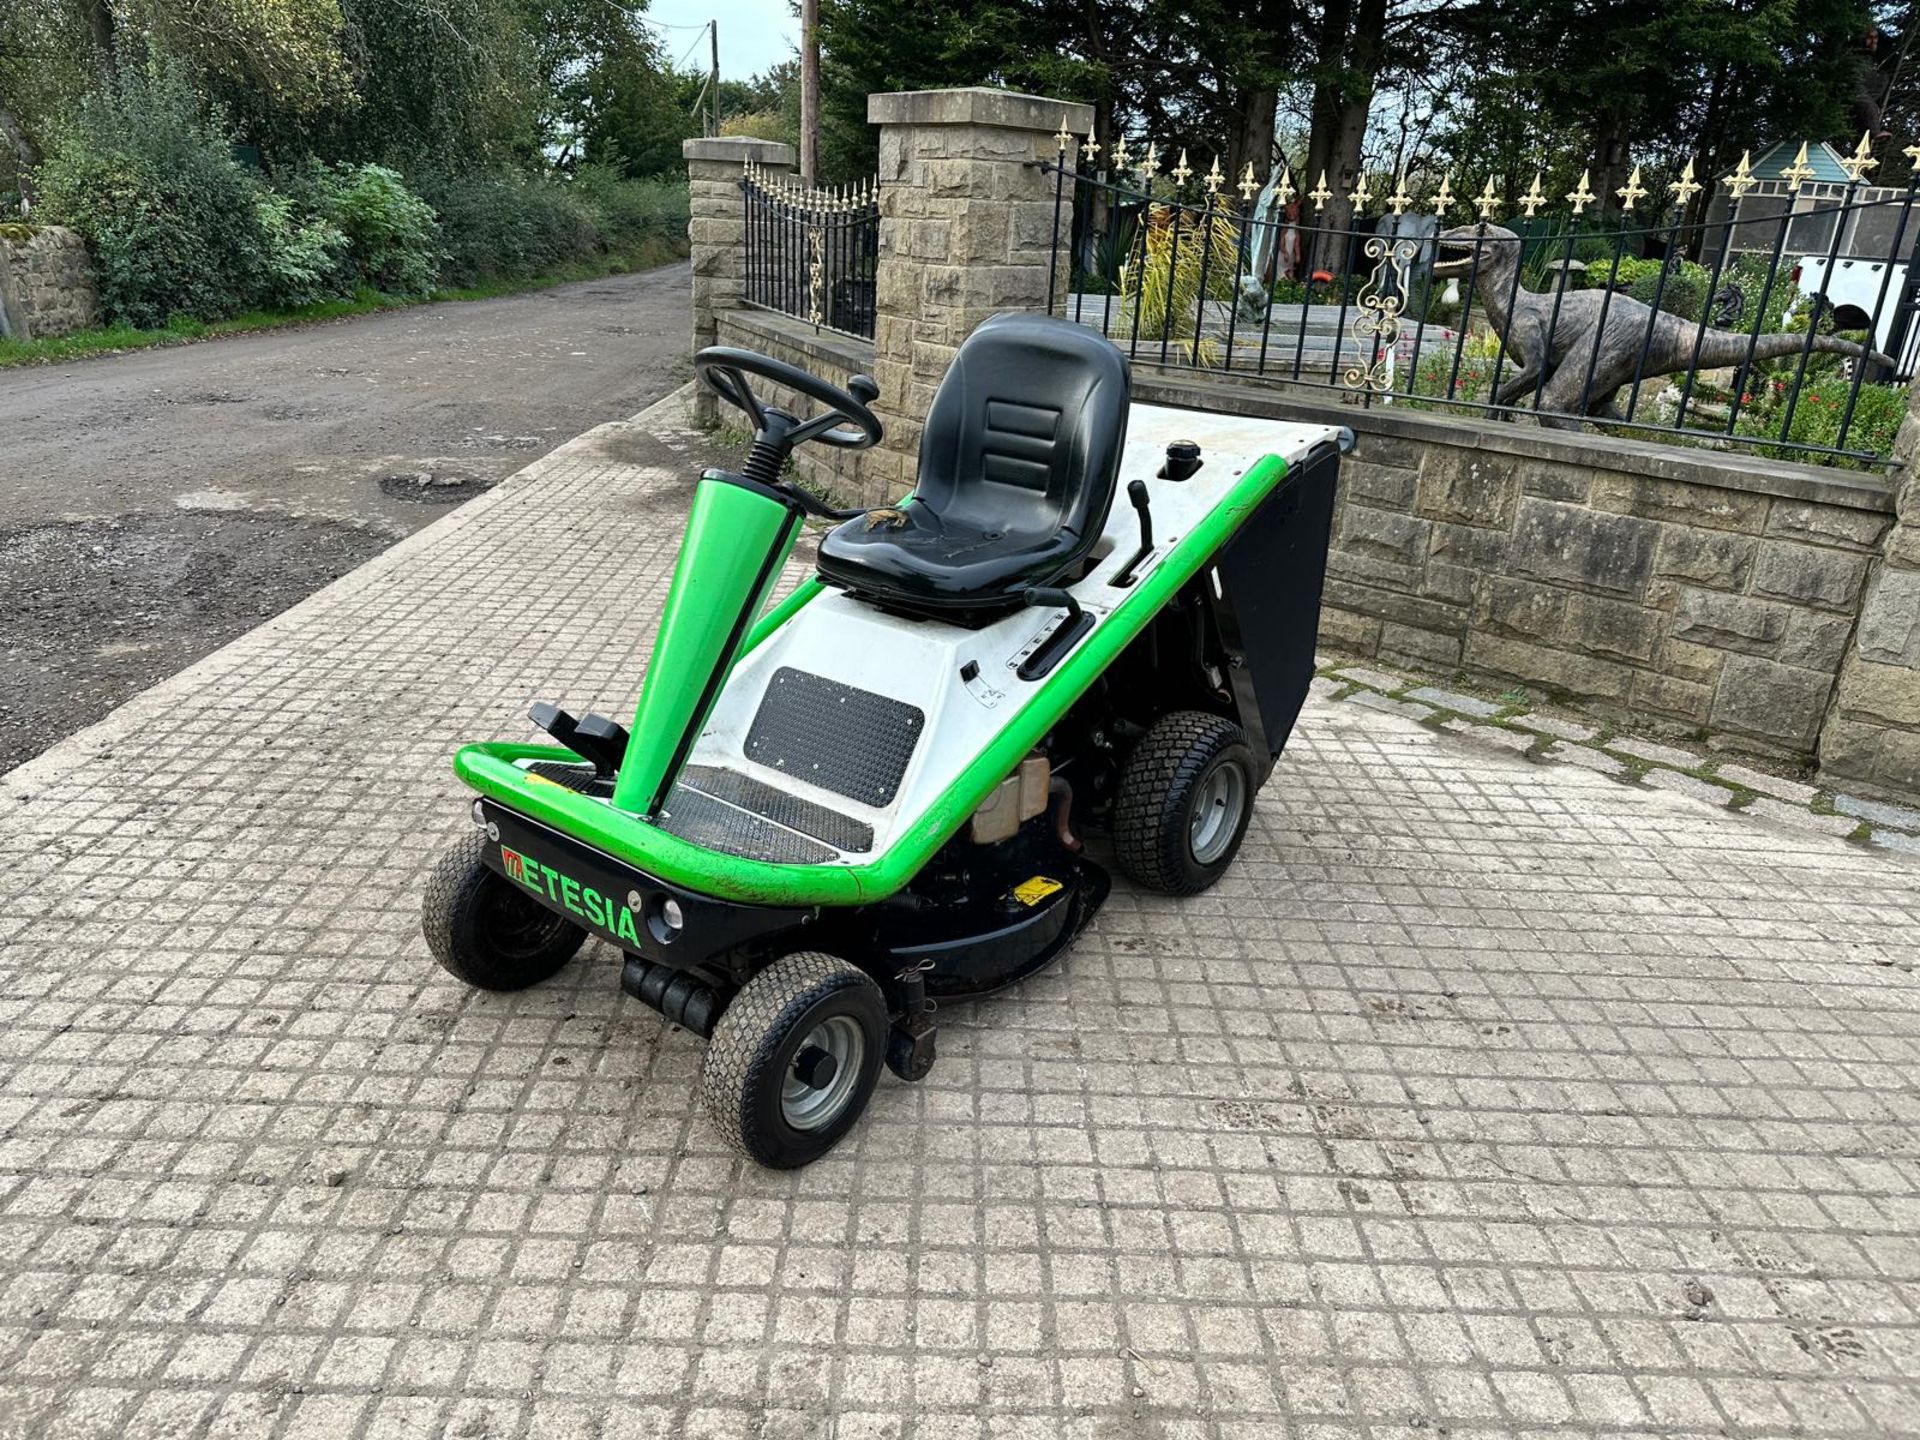 ETESIA MKHP HYDRO 80 RIDE ON MOWER WITH REAR COLLECTOR *NO VAT* - Image 2 of 12